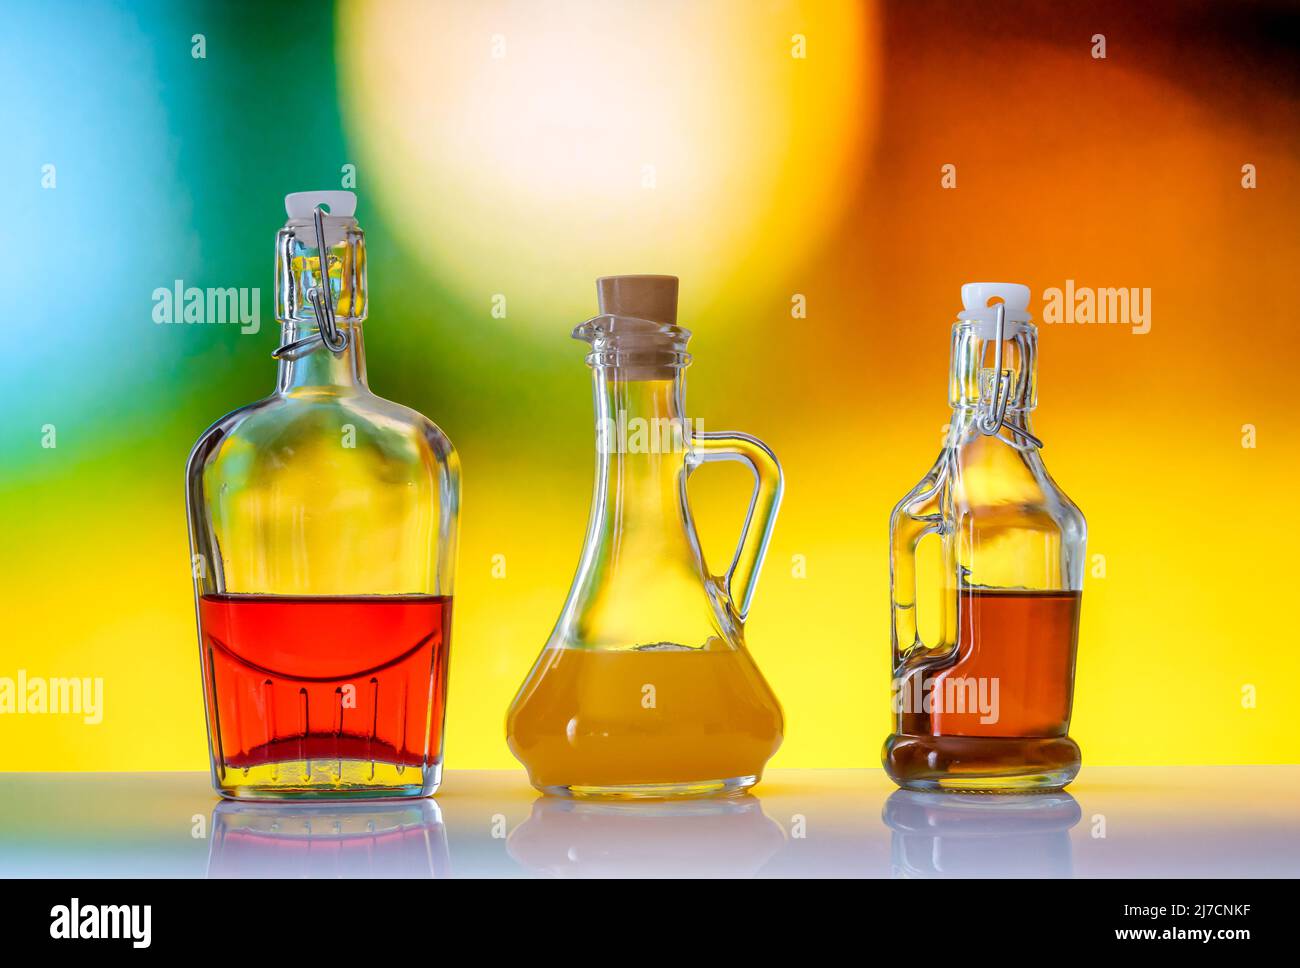 stylish bottles with colored alcohol, drinks on a soft blurred background Stock Photo